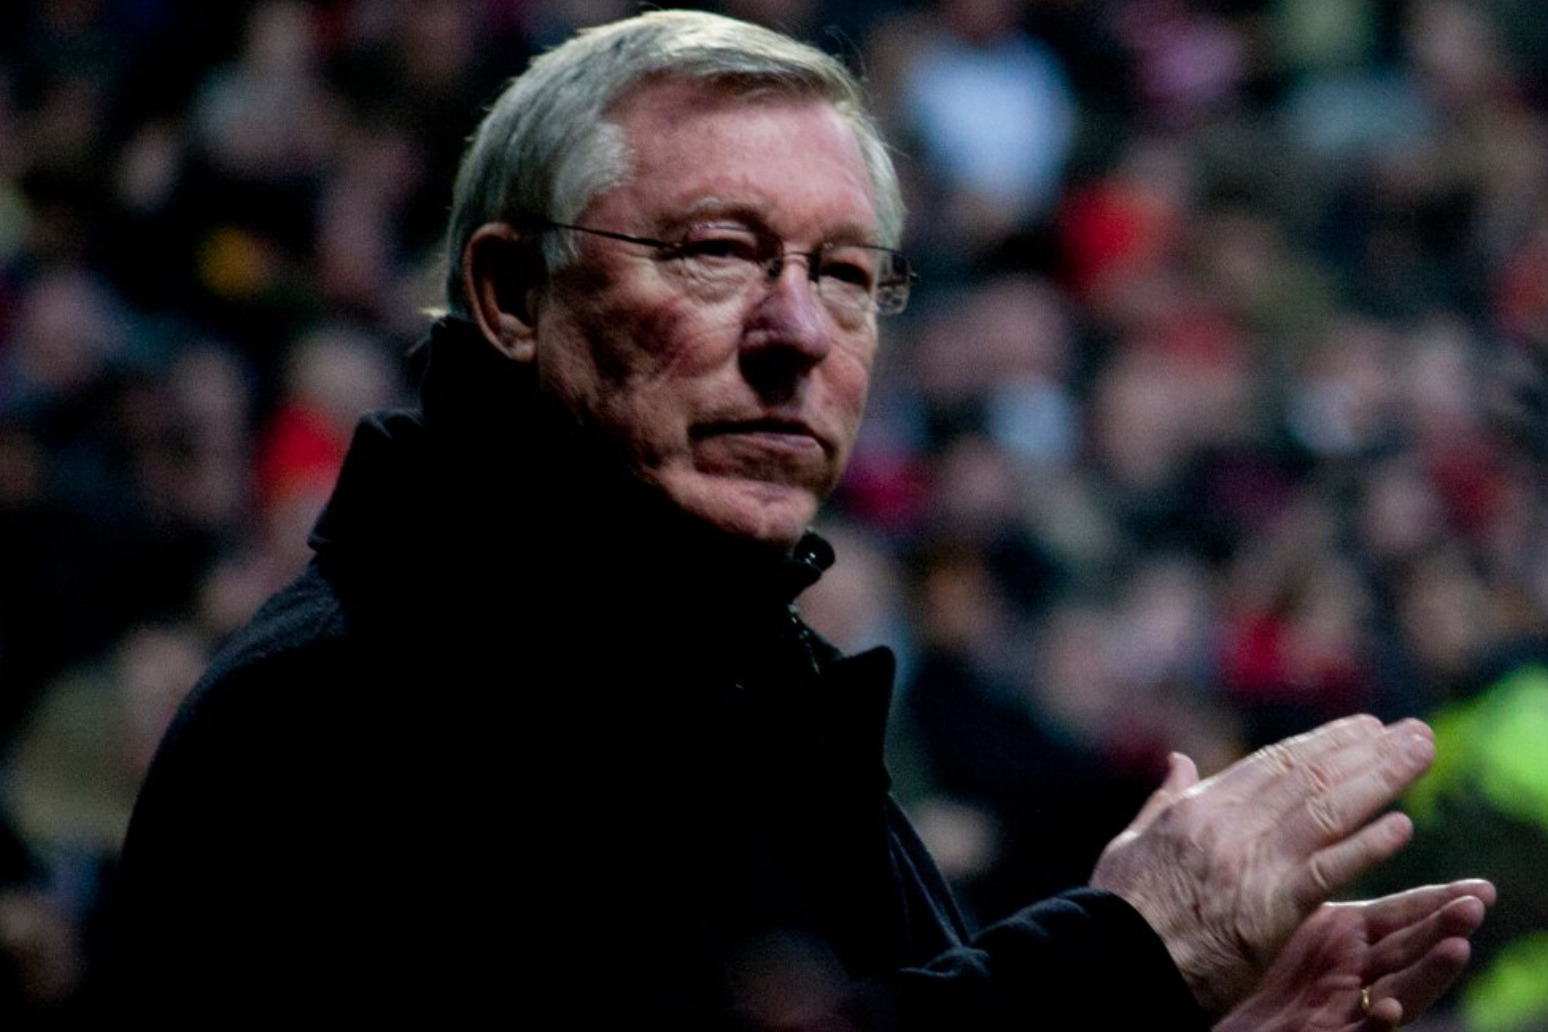 The world of football unites to support managerial great Ferguson 